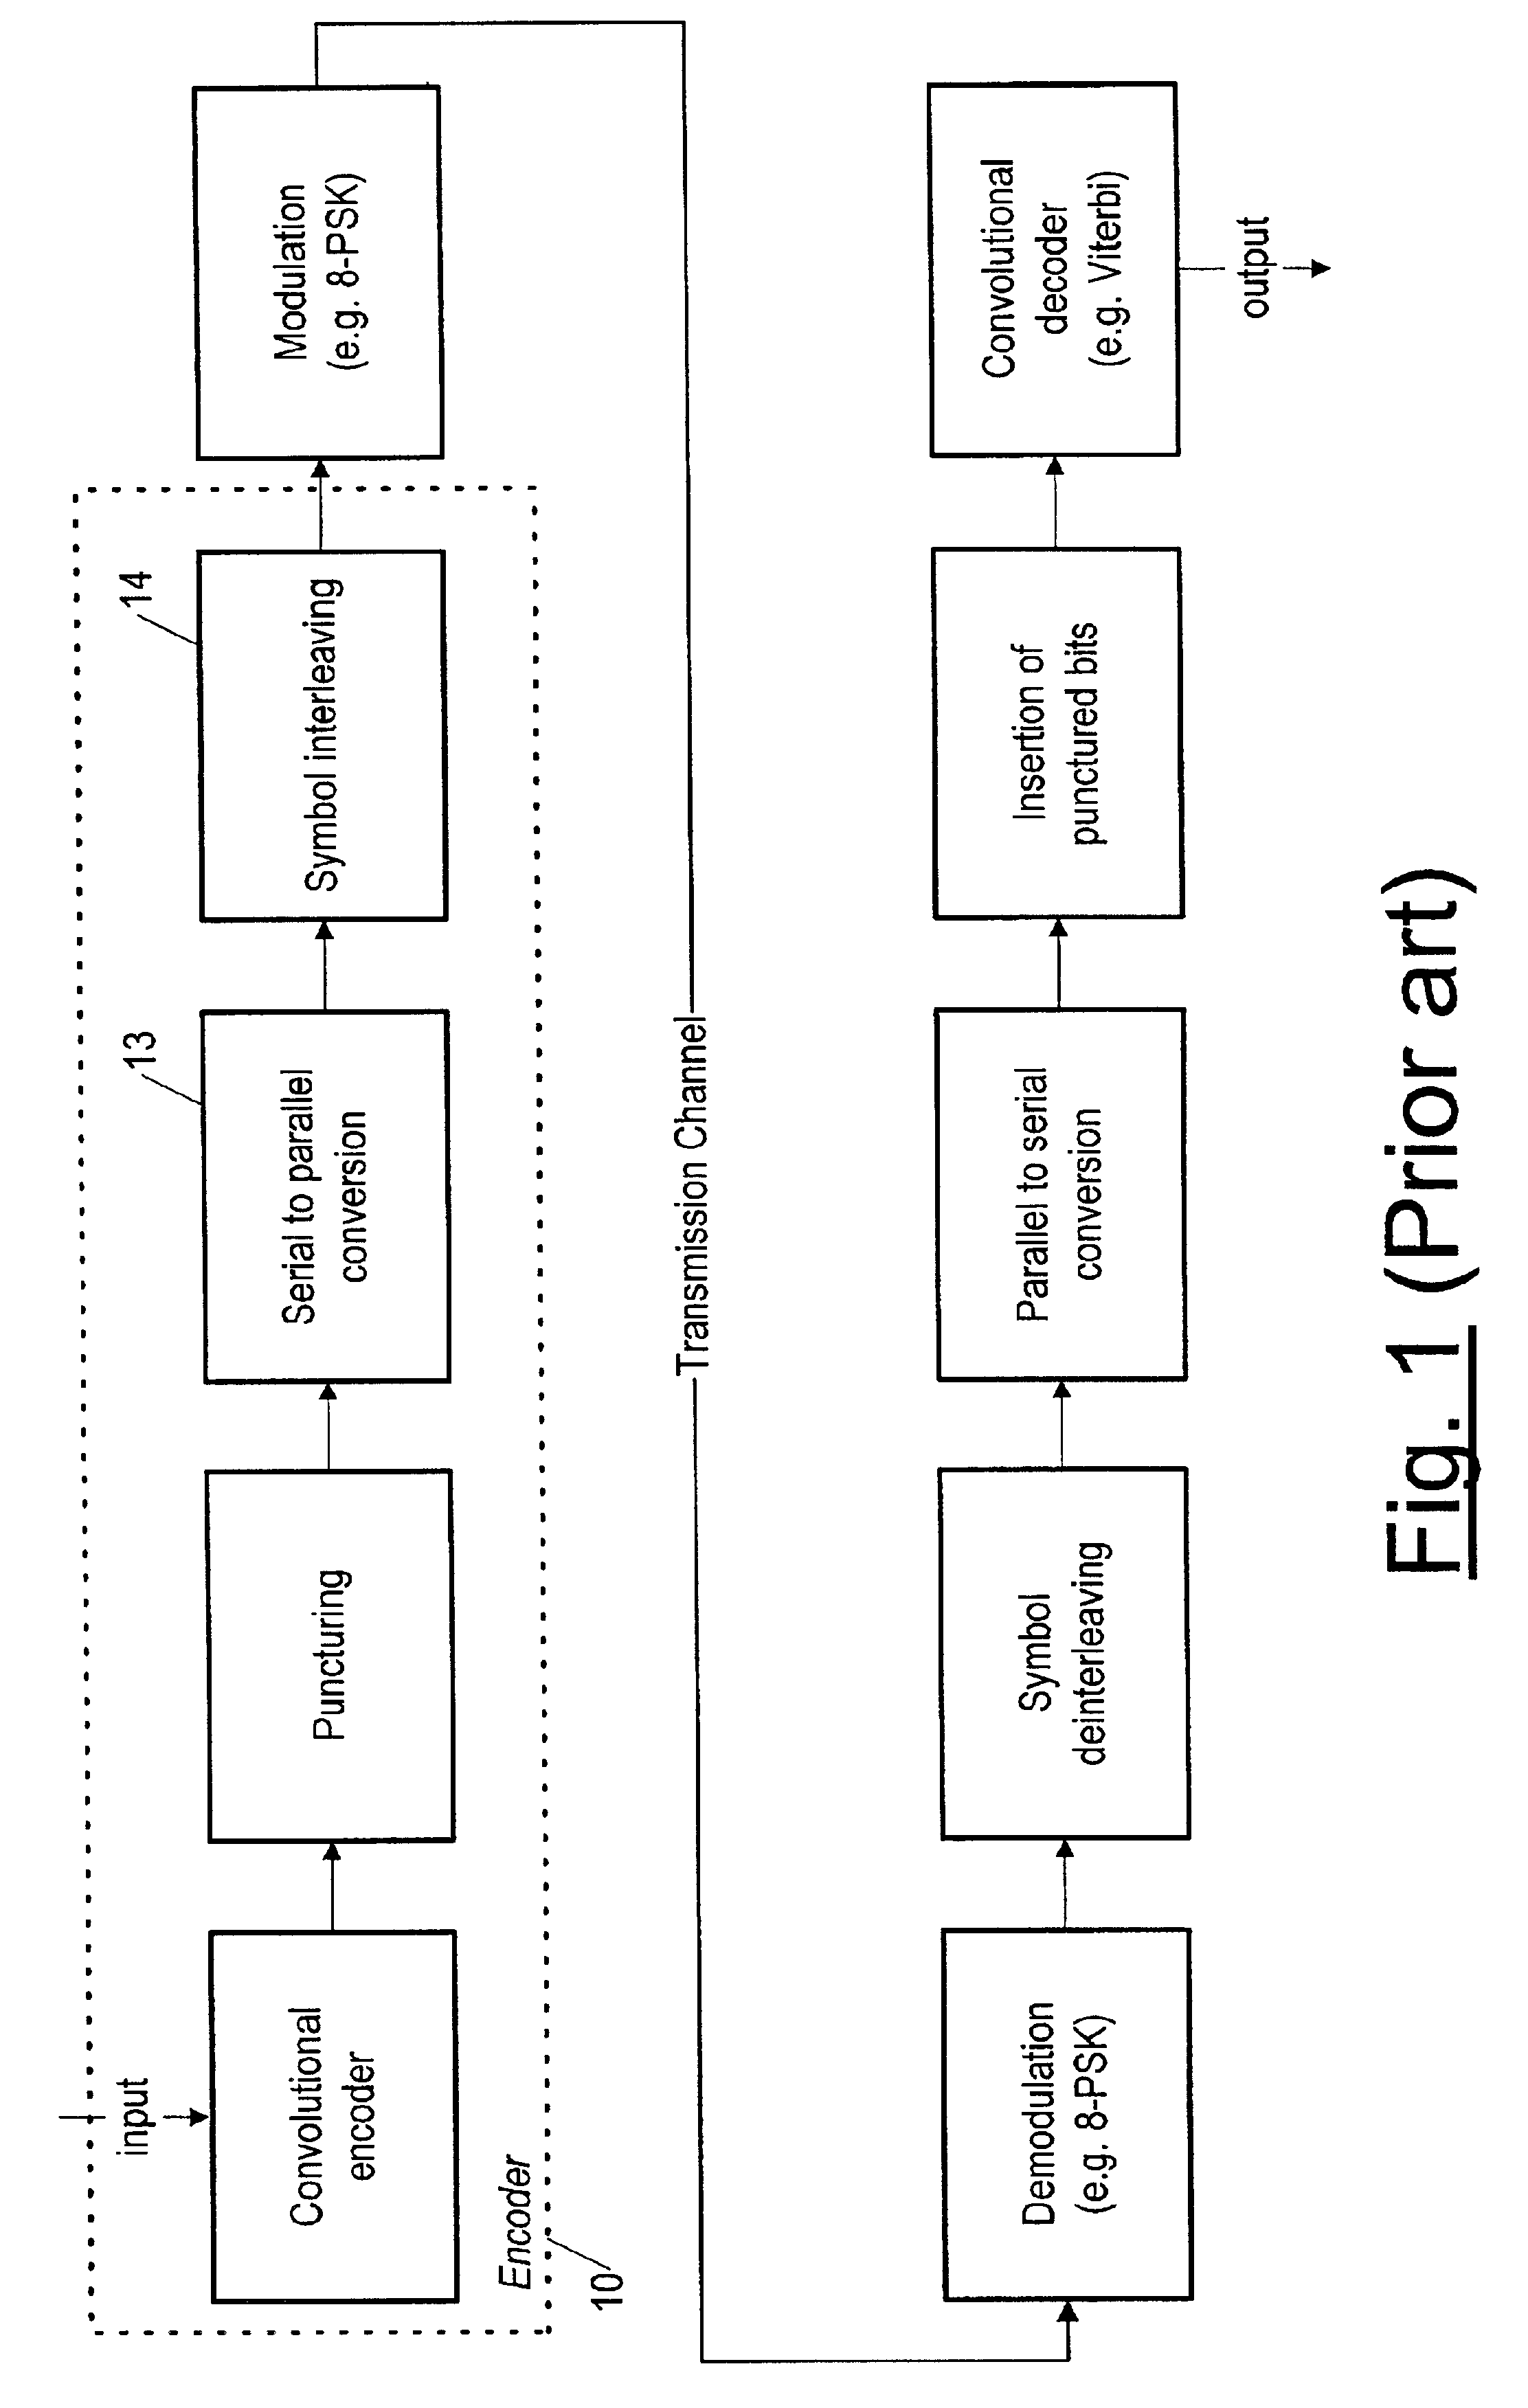 Method and system for allocating convolutional encoded bits into symbols before modulation for wireless communication